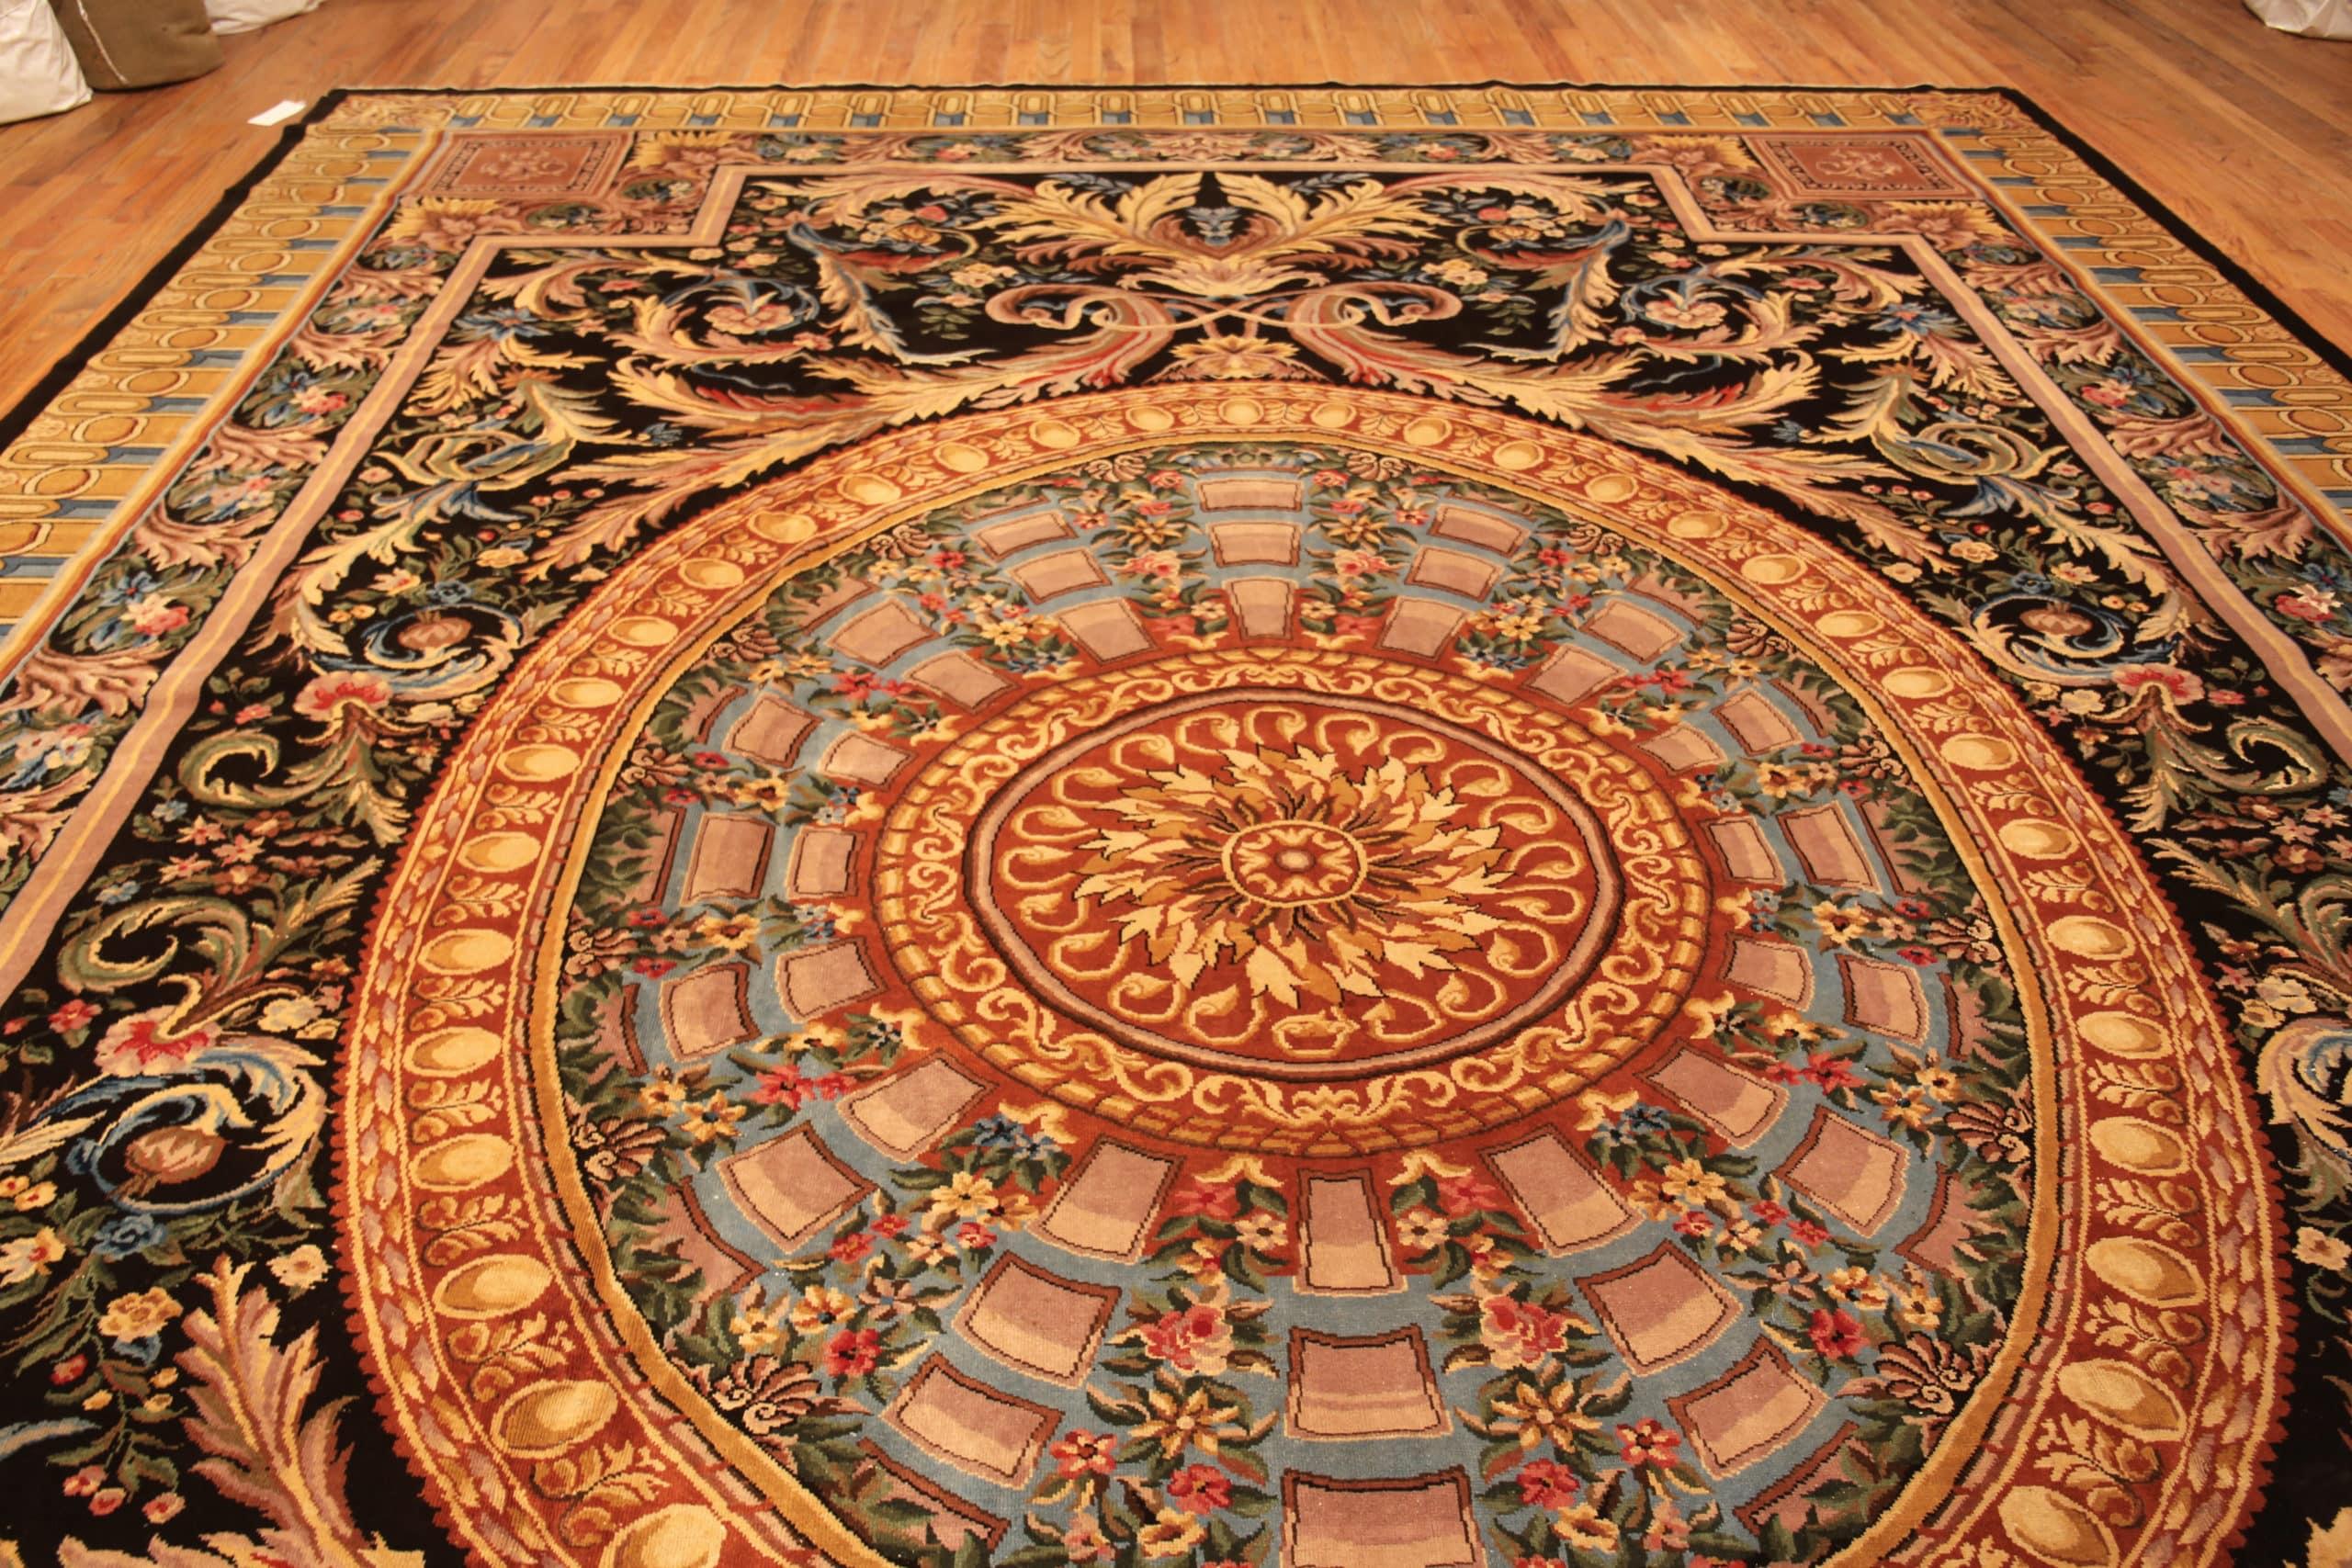 Beautiful Elegant Large Vintage Classic Renaissance Savonnerie Style Rug, Country of Origin: India, Circa date: Vintage . Size: 14 ft 4 in x 17 ft 8 in (4.37 m x 5.38 m)

